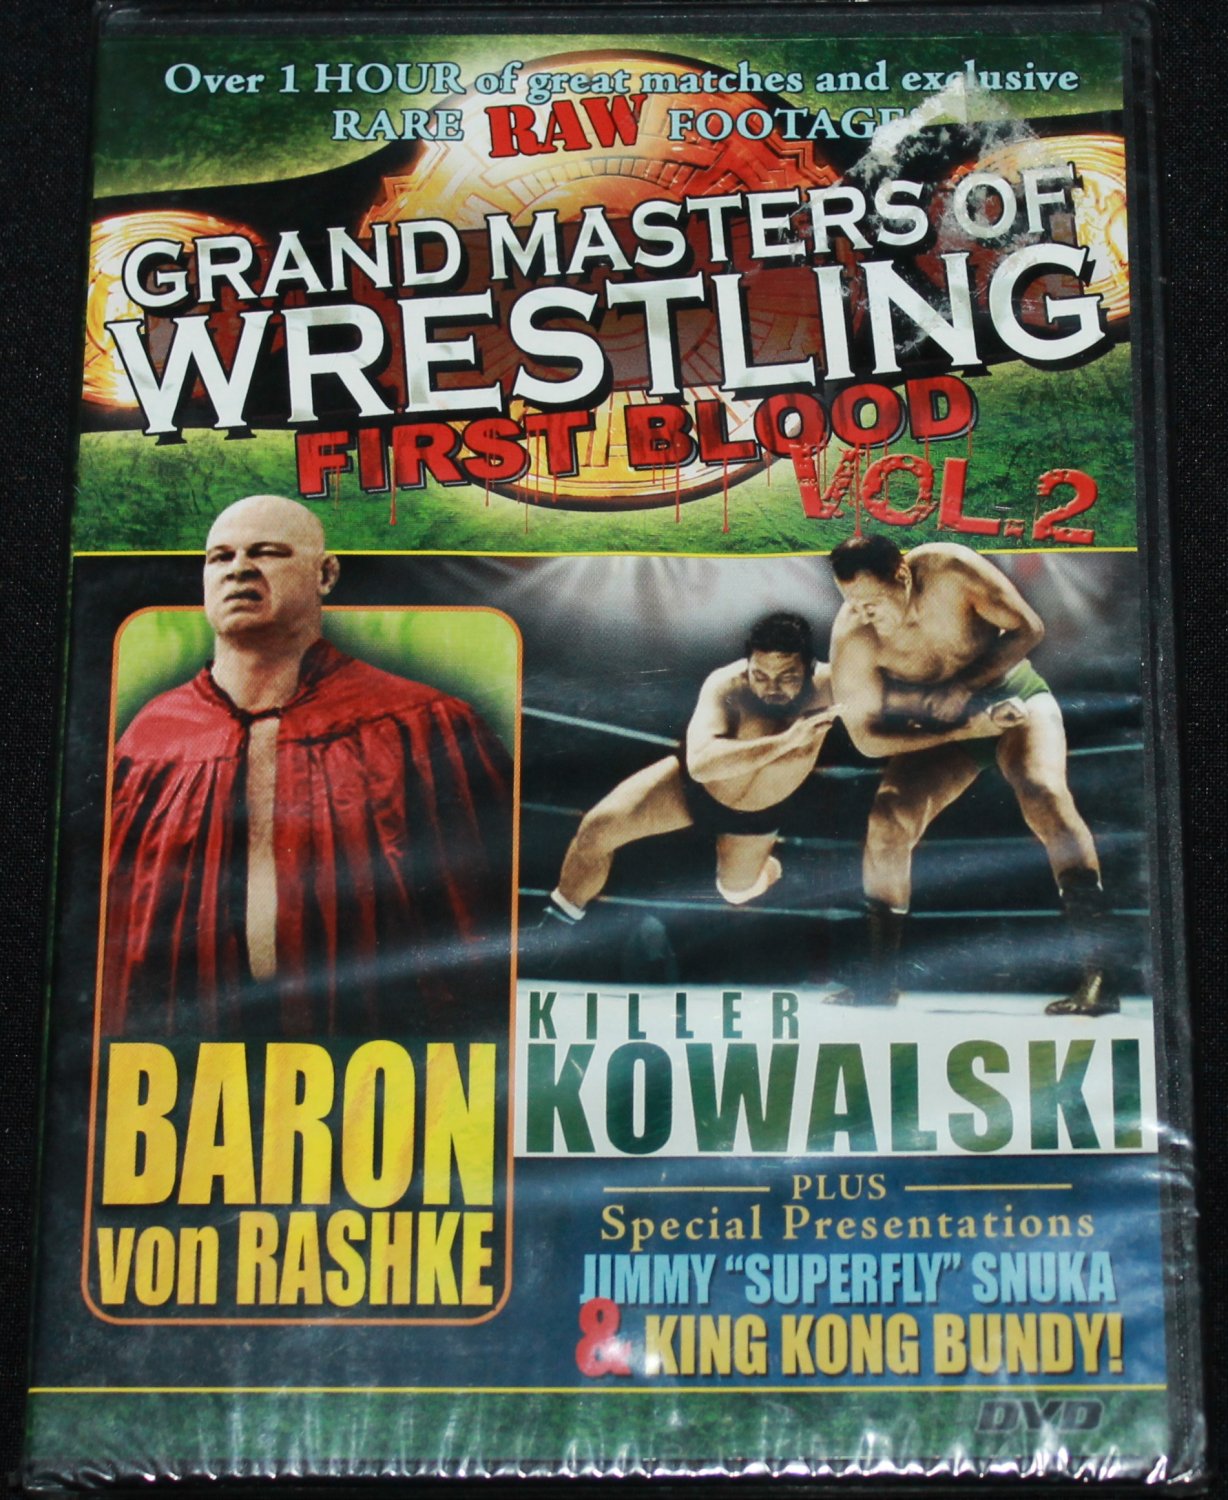 Grand Masters of Wrestling Vol 1&2 DVD Review 